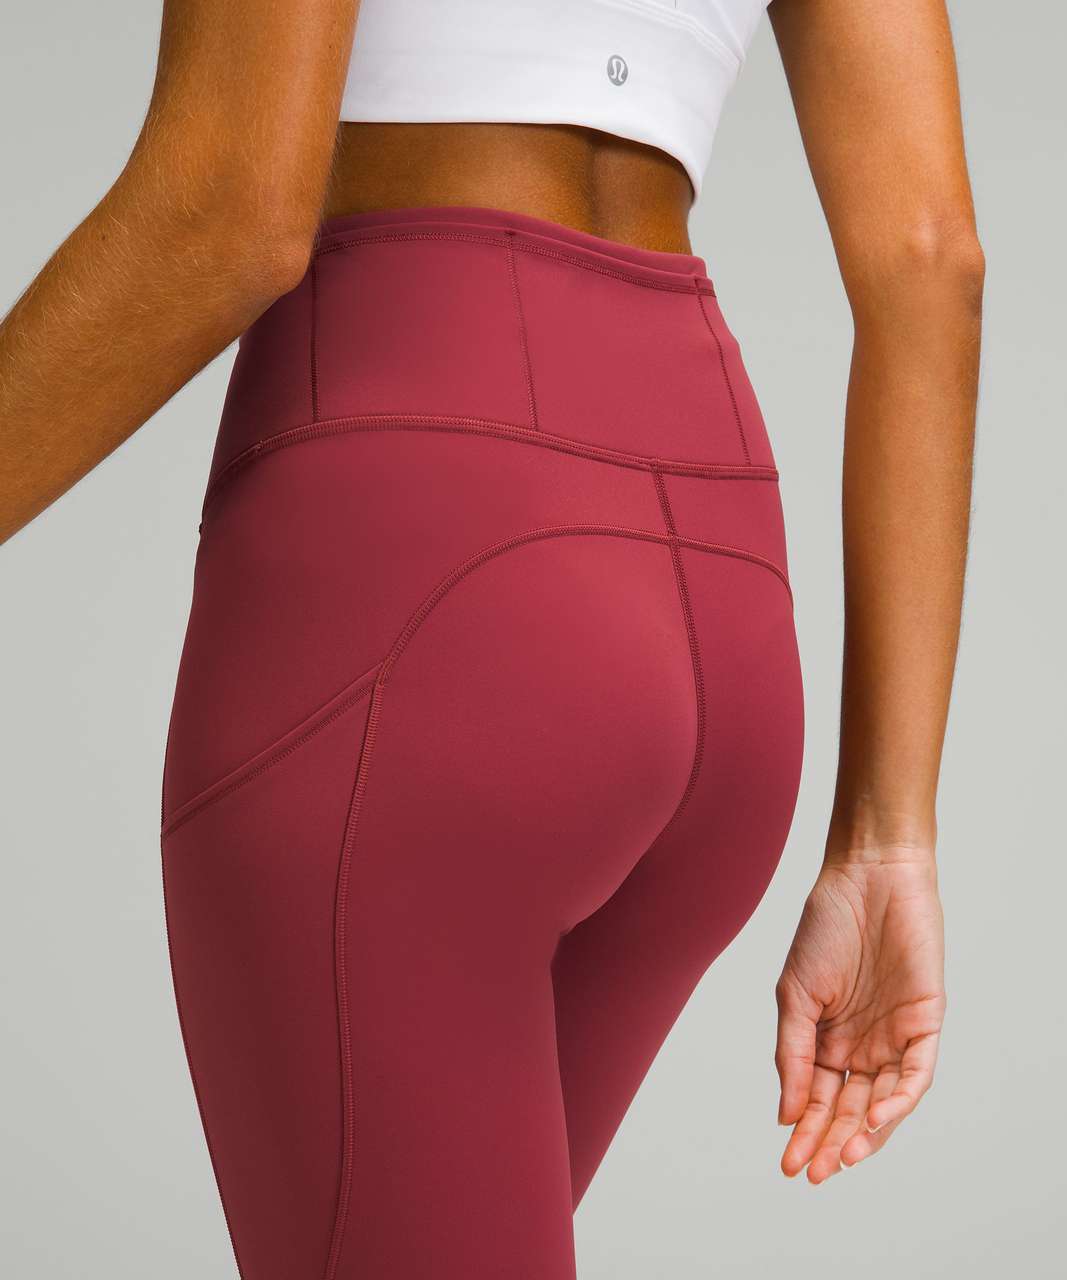 Lululemon Fast and Free High-Rise Tight 25" *Brushed Nulux - Mulled Wine